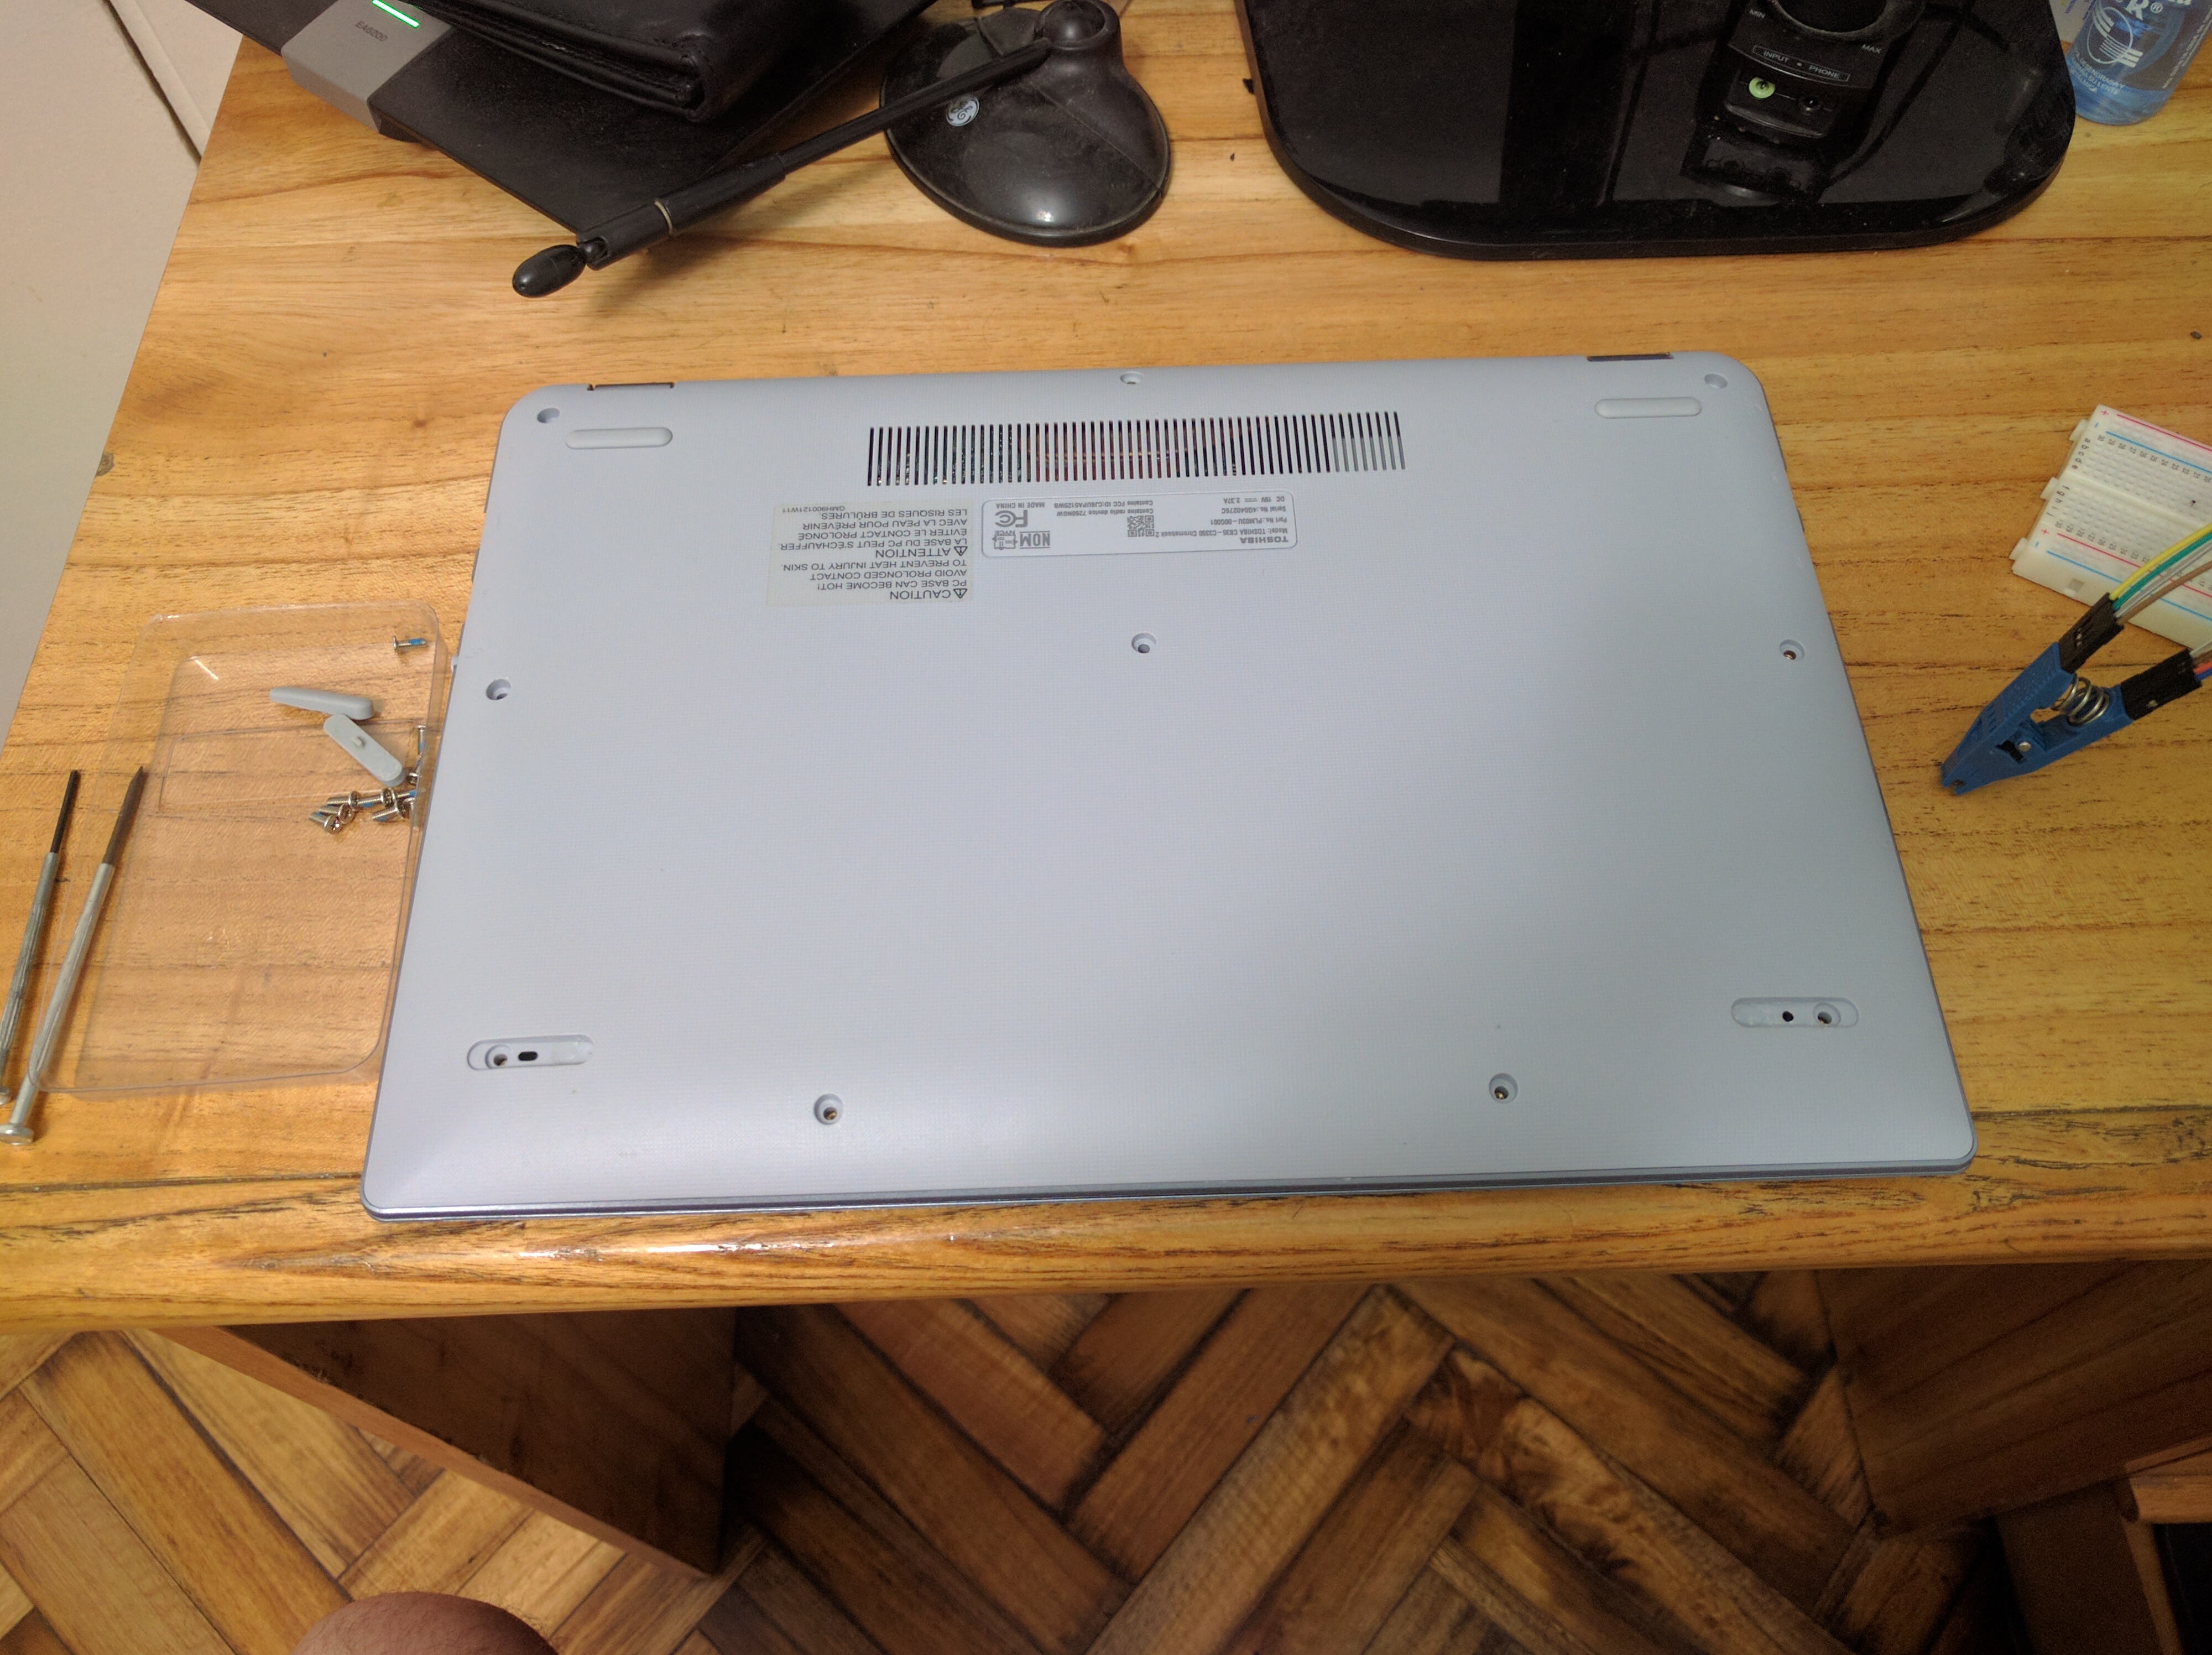 How to Un-Brick your Toshiba Chromebook 2 (Gandof) without invoking any demons